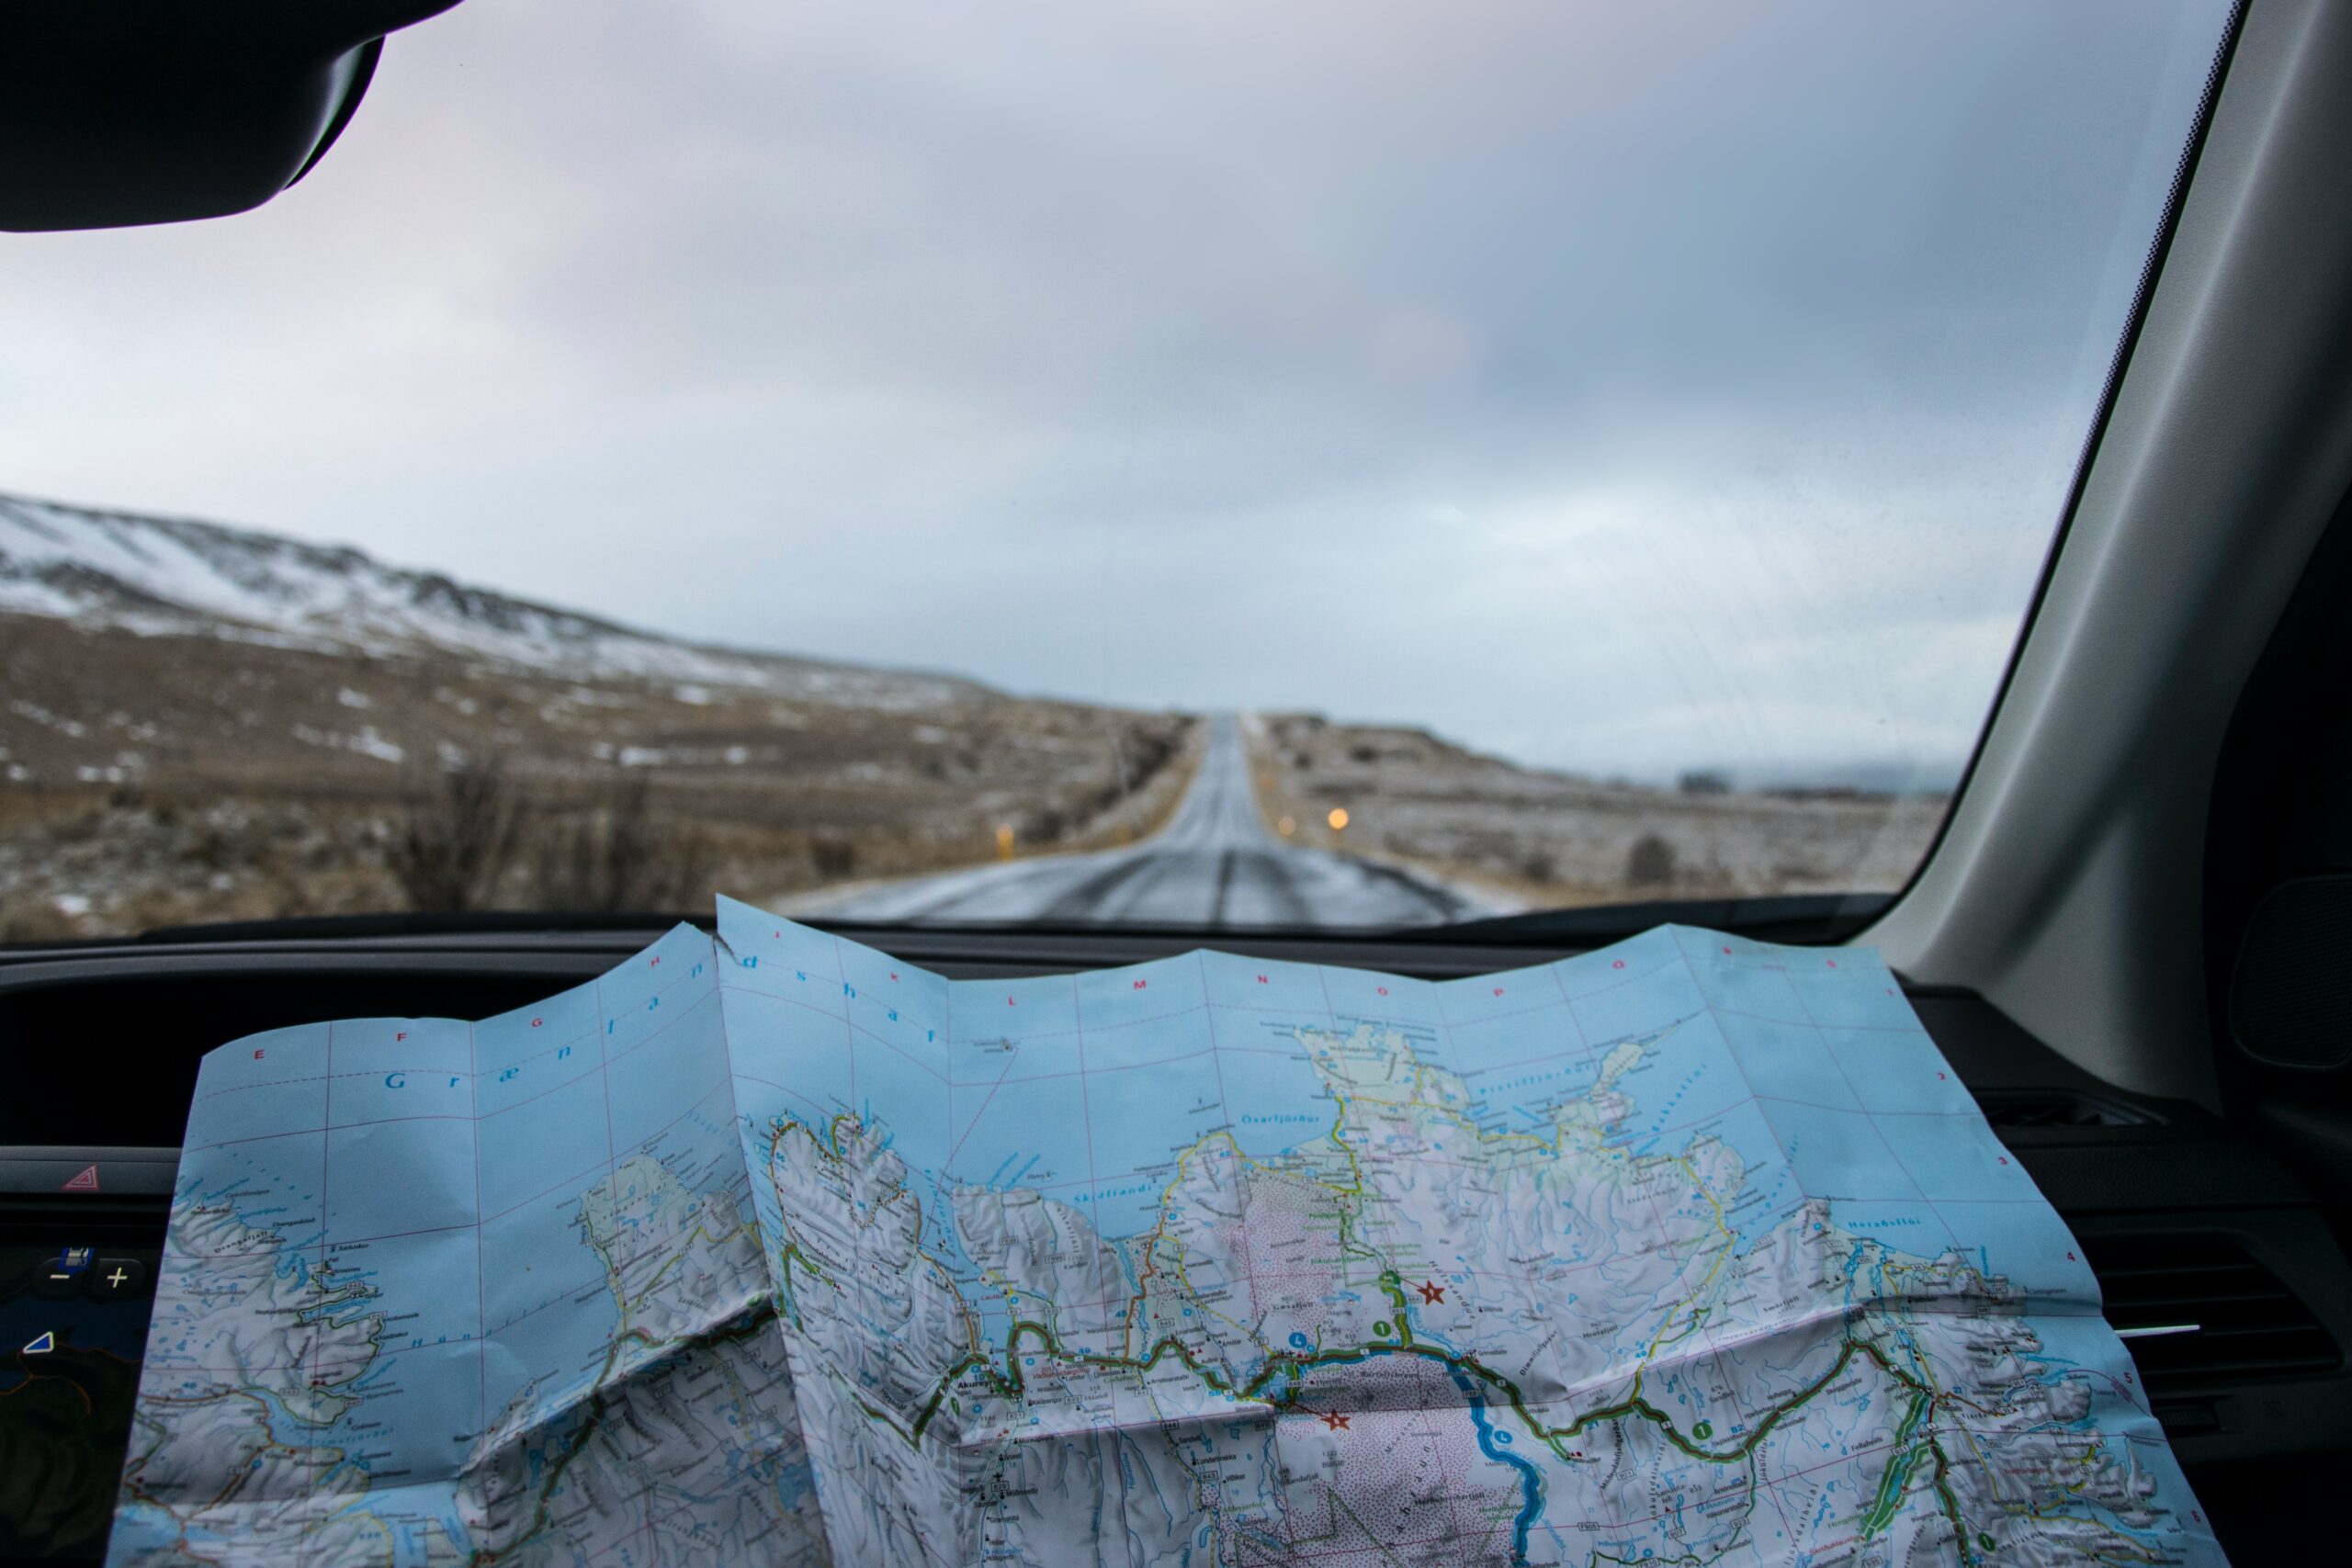 View from a car's passenger seat showing an open road stretching through a snowy landscape, with a map unfolded on the dashboard, suggesting relocation plans.